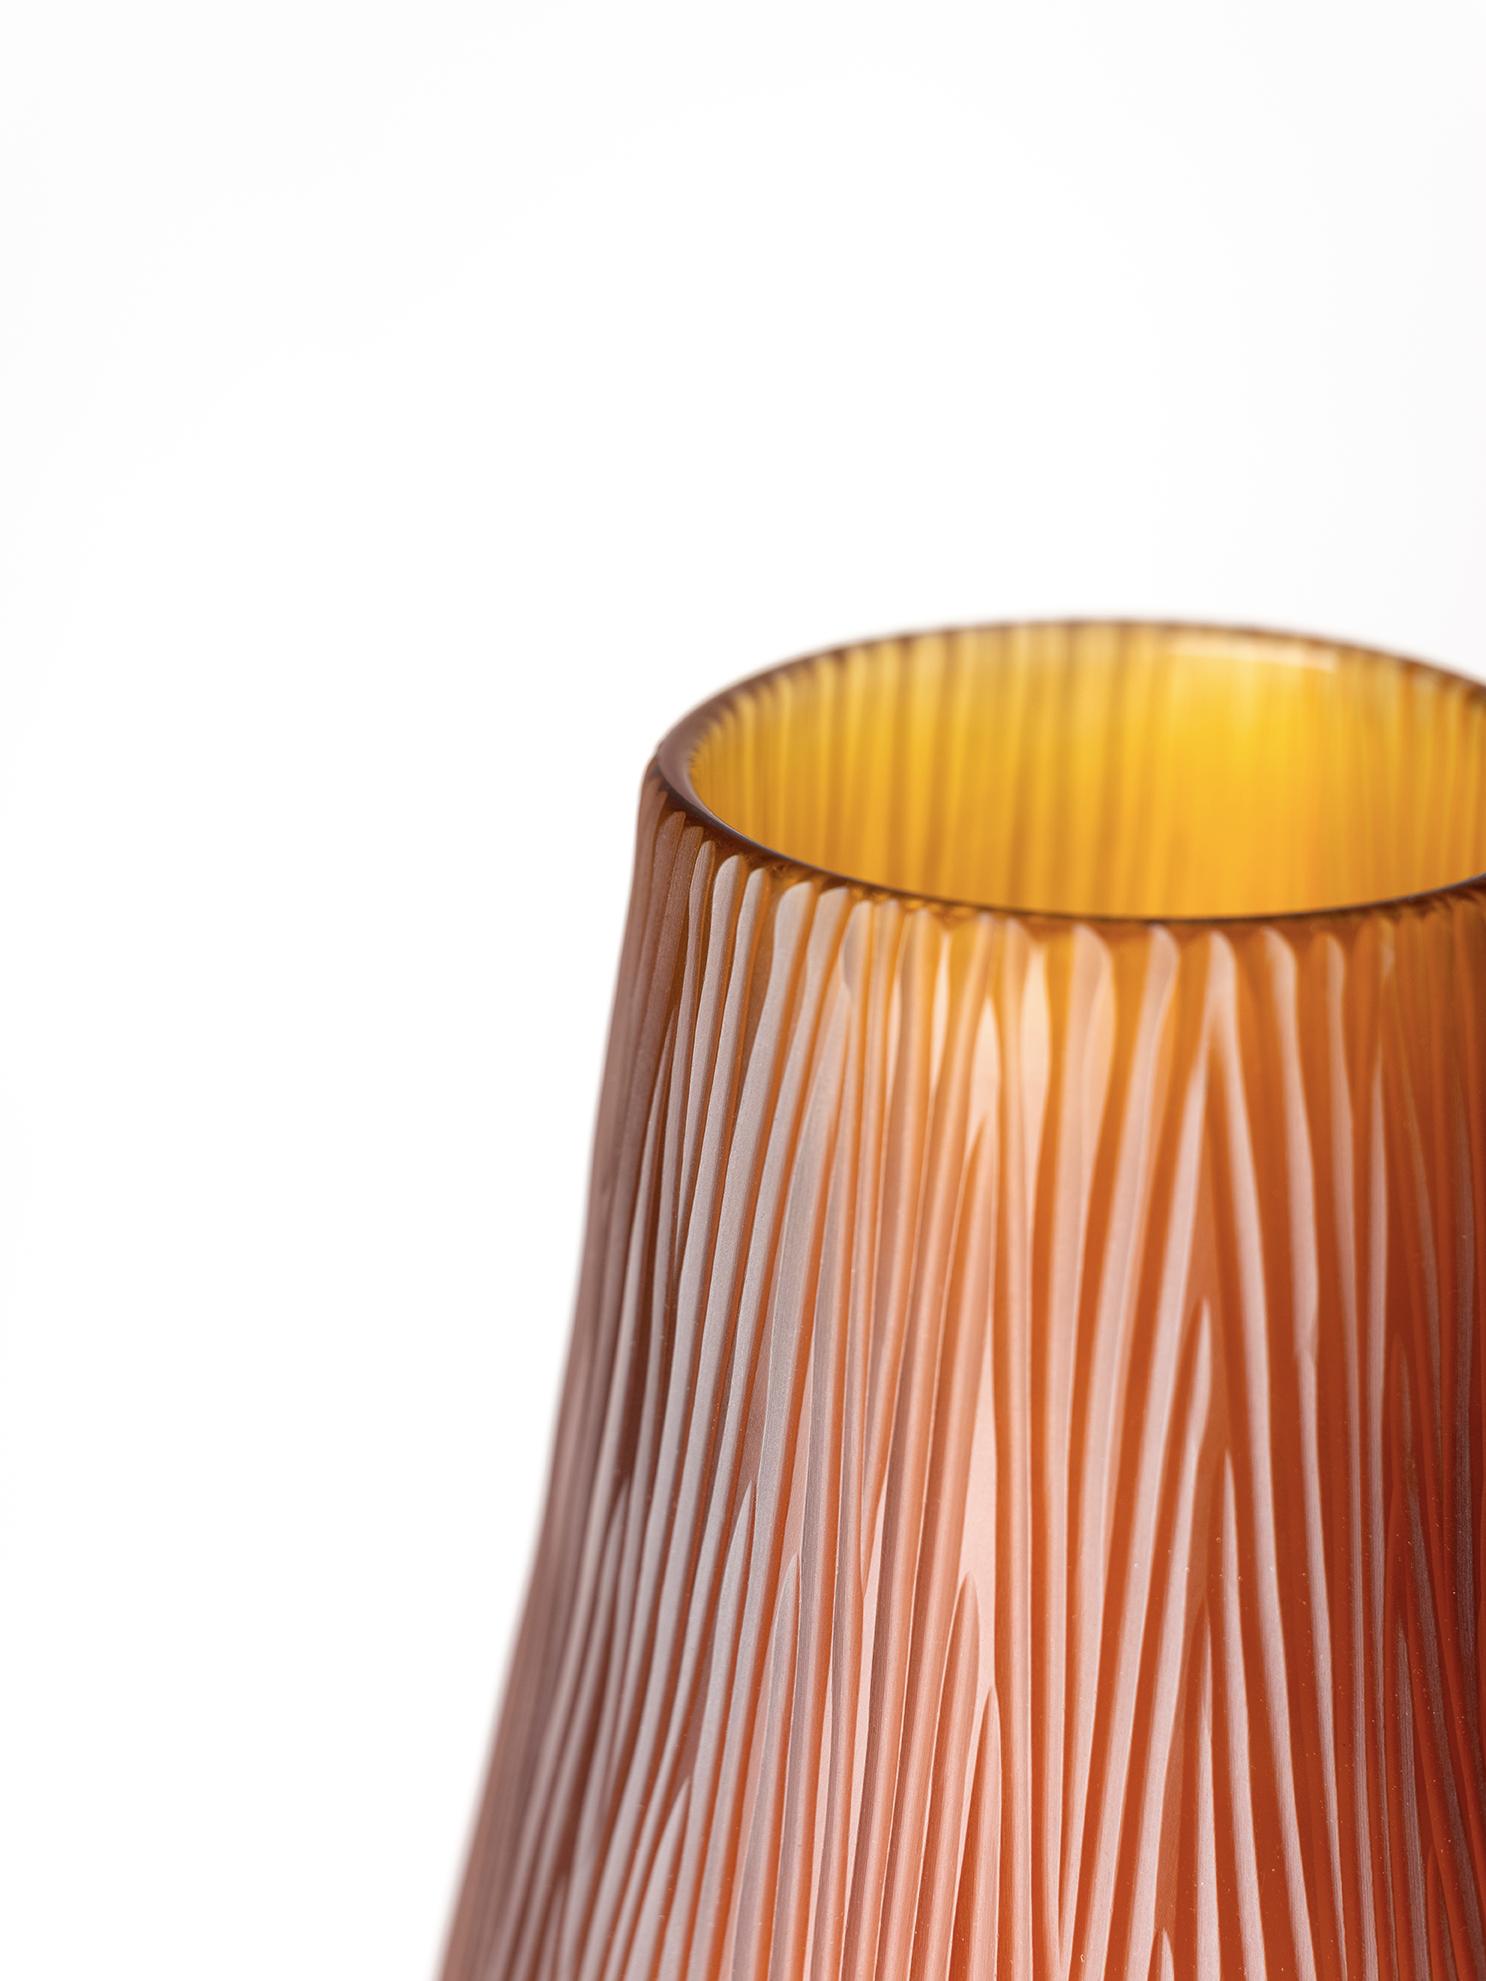 Puparìn is a vase from the Laguna Collection designed by Ludovica+Roberto Palomba for Purho in spring 2022.
Thin, slender and marked by a thick clear glass base that seems to make the colour float inside the vase, Puparìn — the name of which